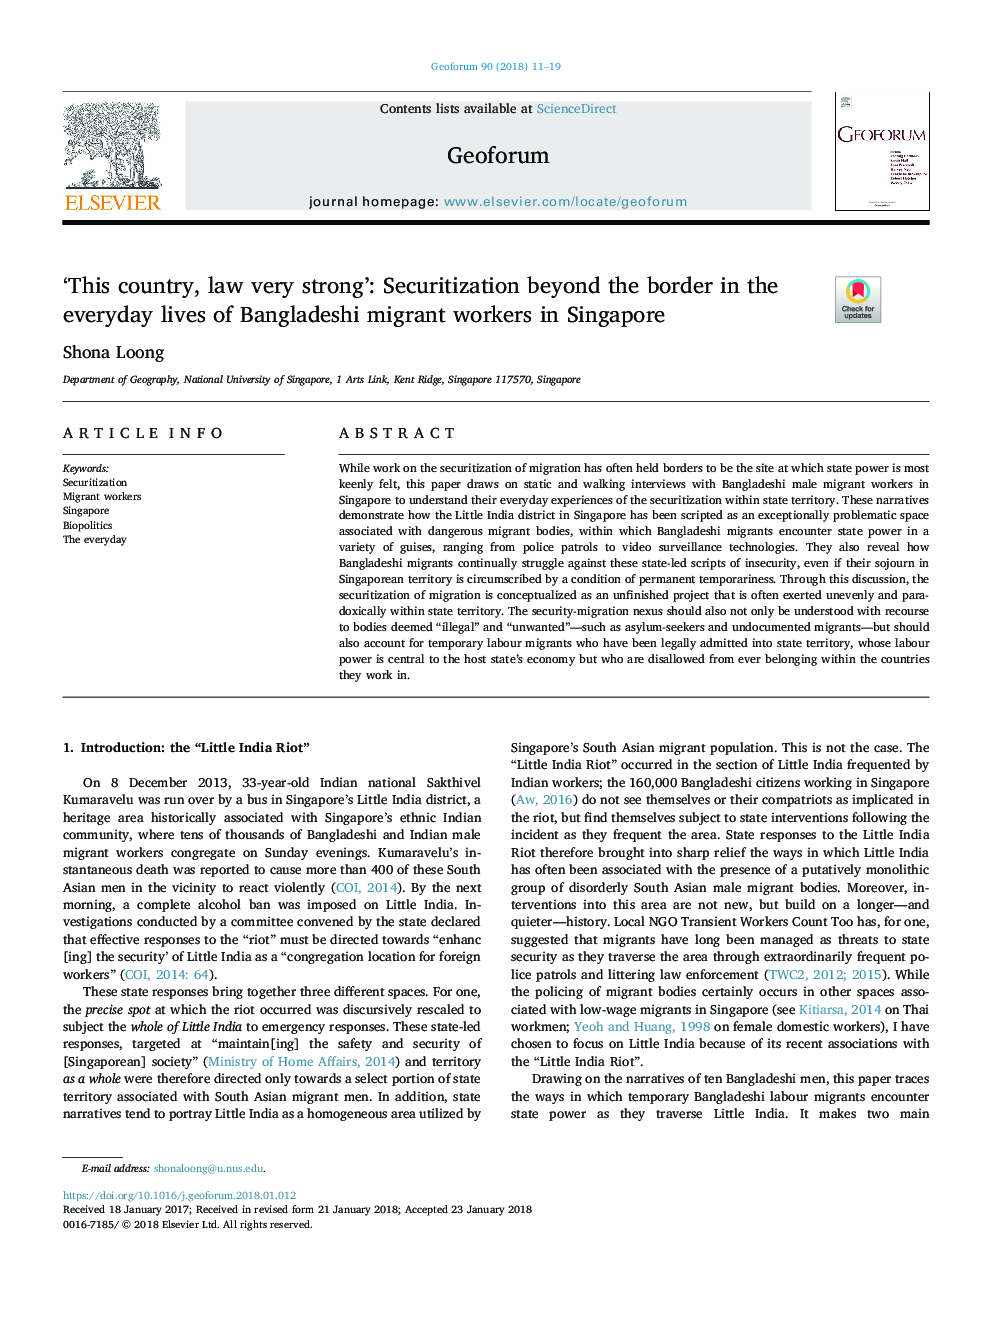 'This country, law very strong': Securitization beyond the border in the everyday lives of Bangladeshi migrant workers in Singapore